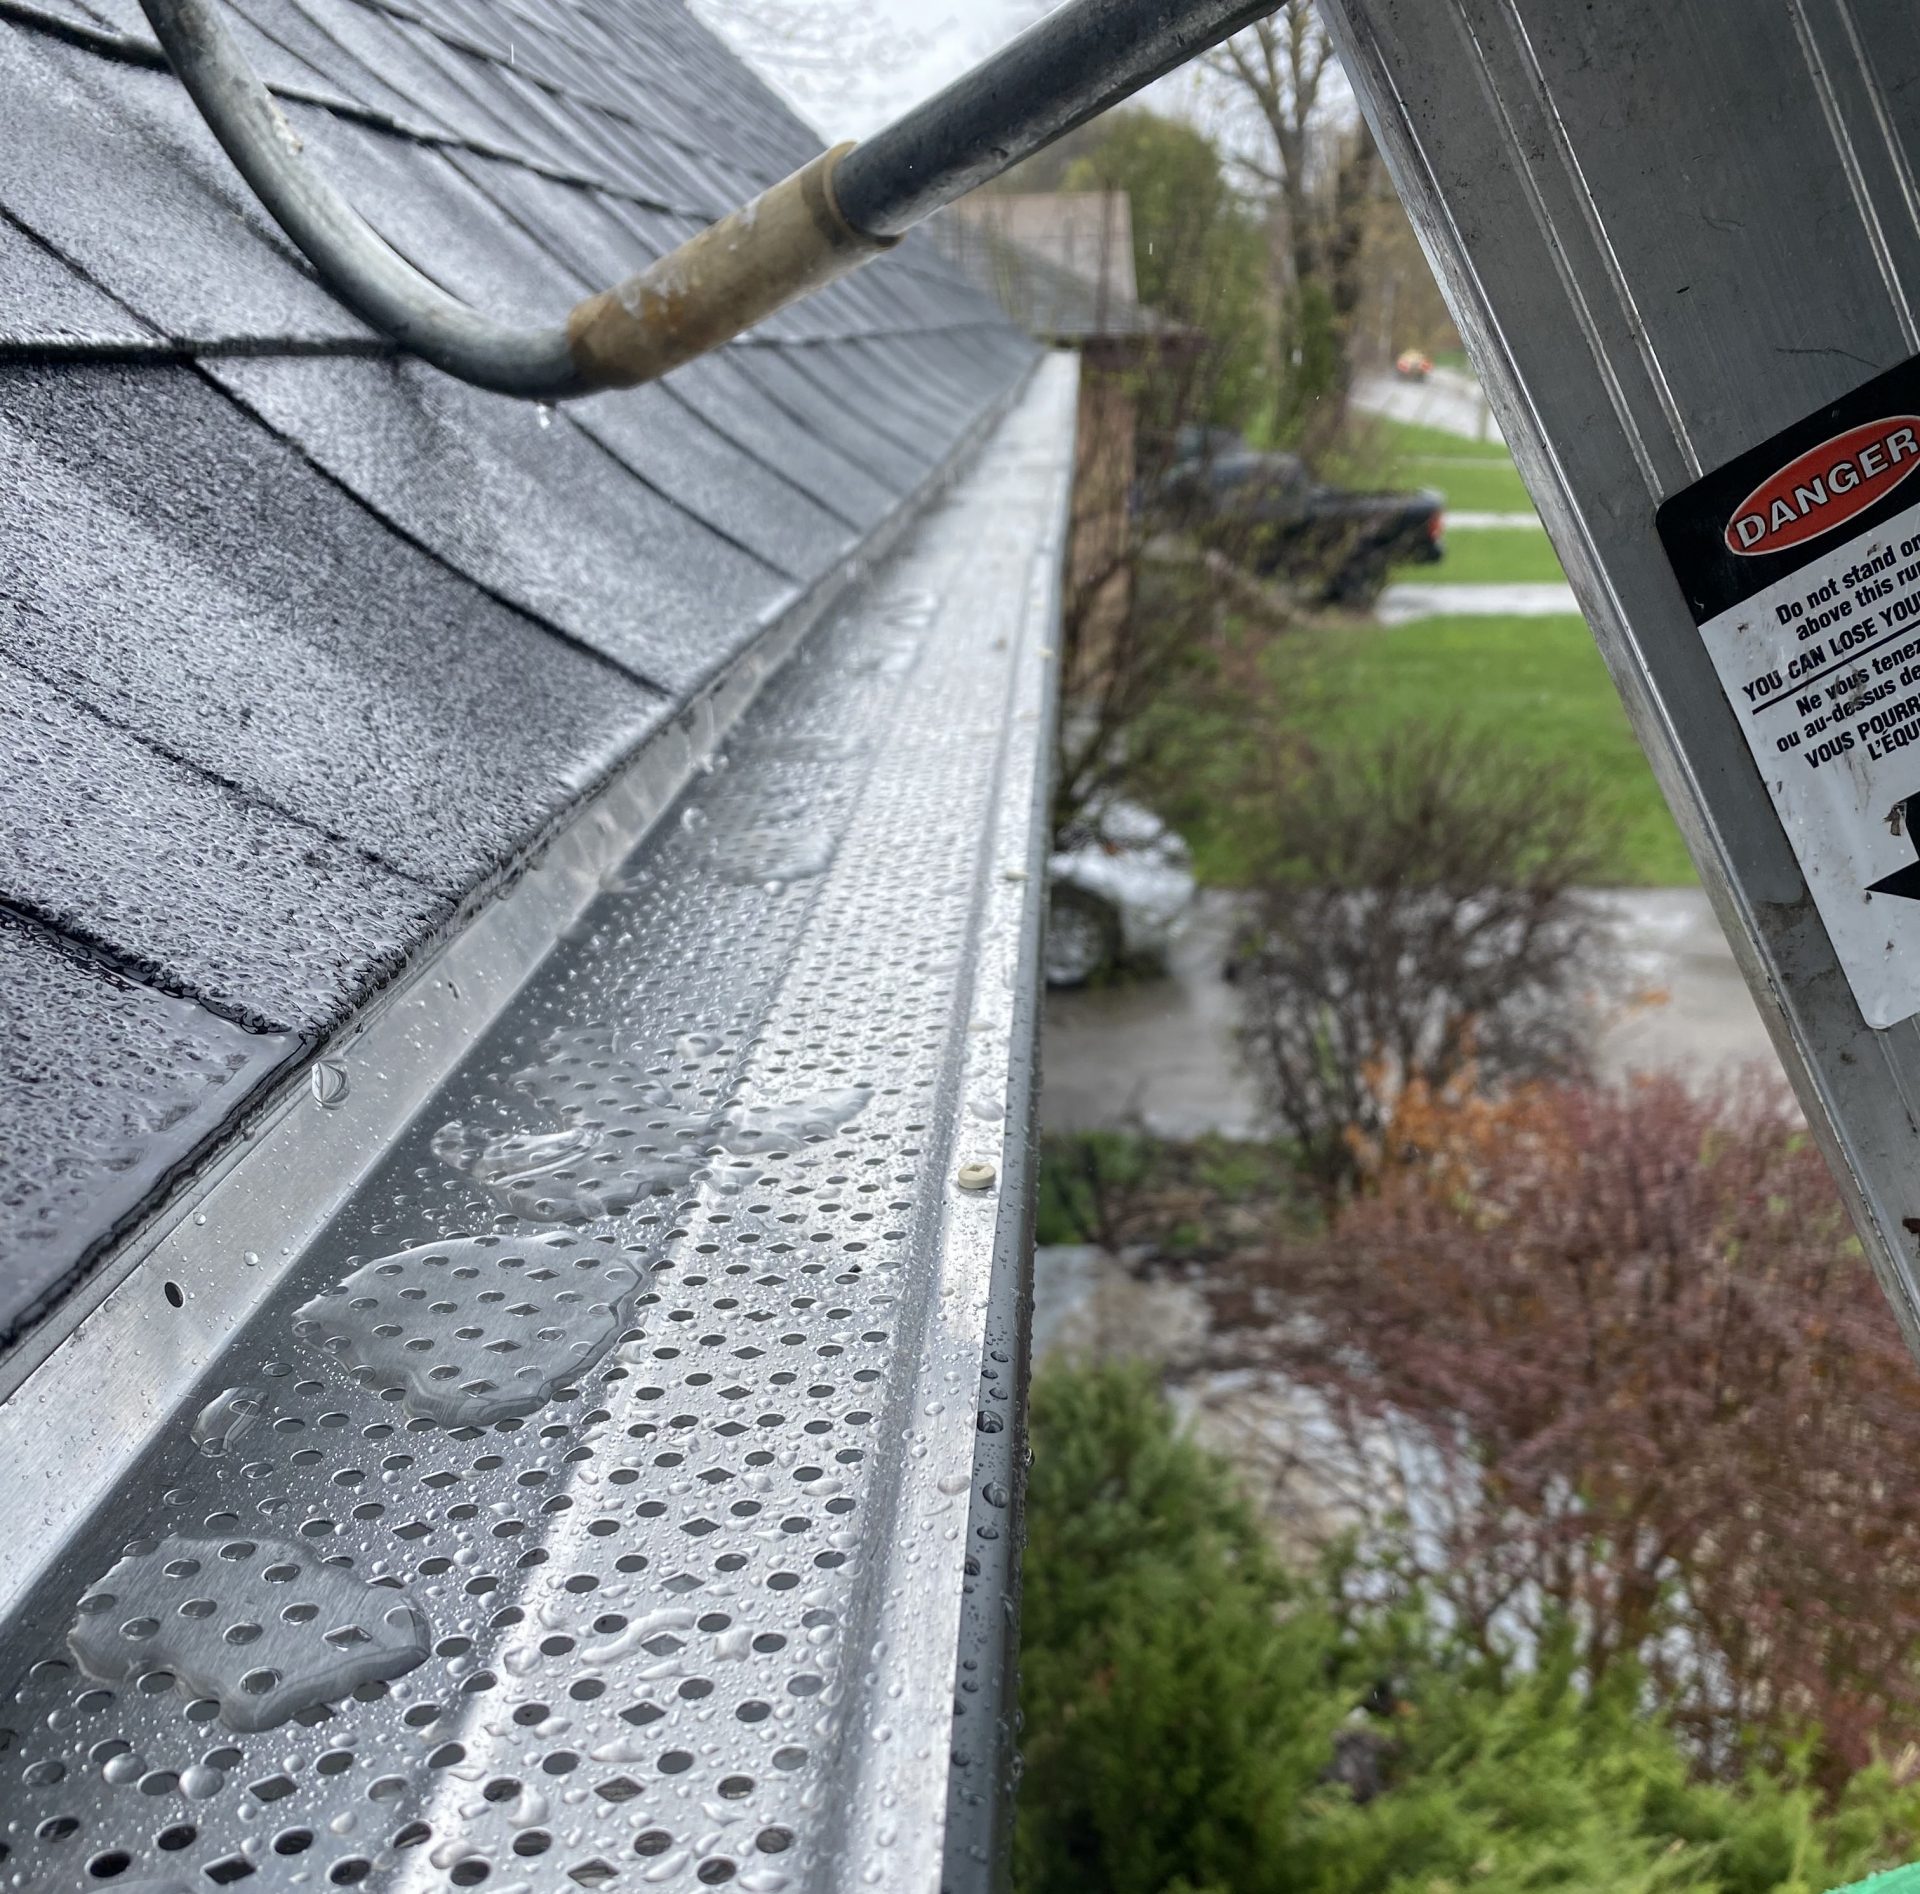 Eavestrough Problems Solved with Gutter Guards